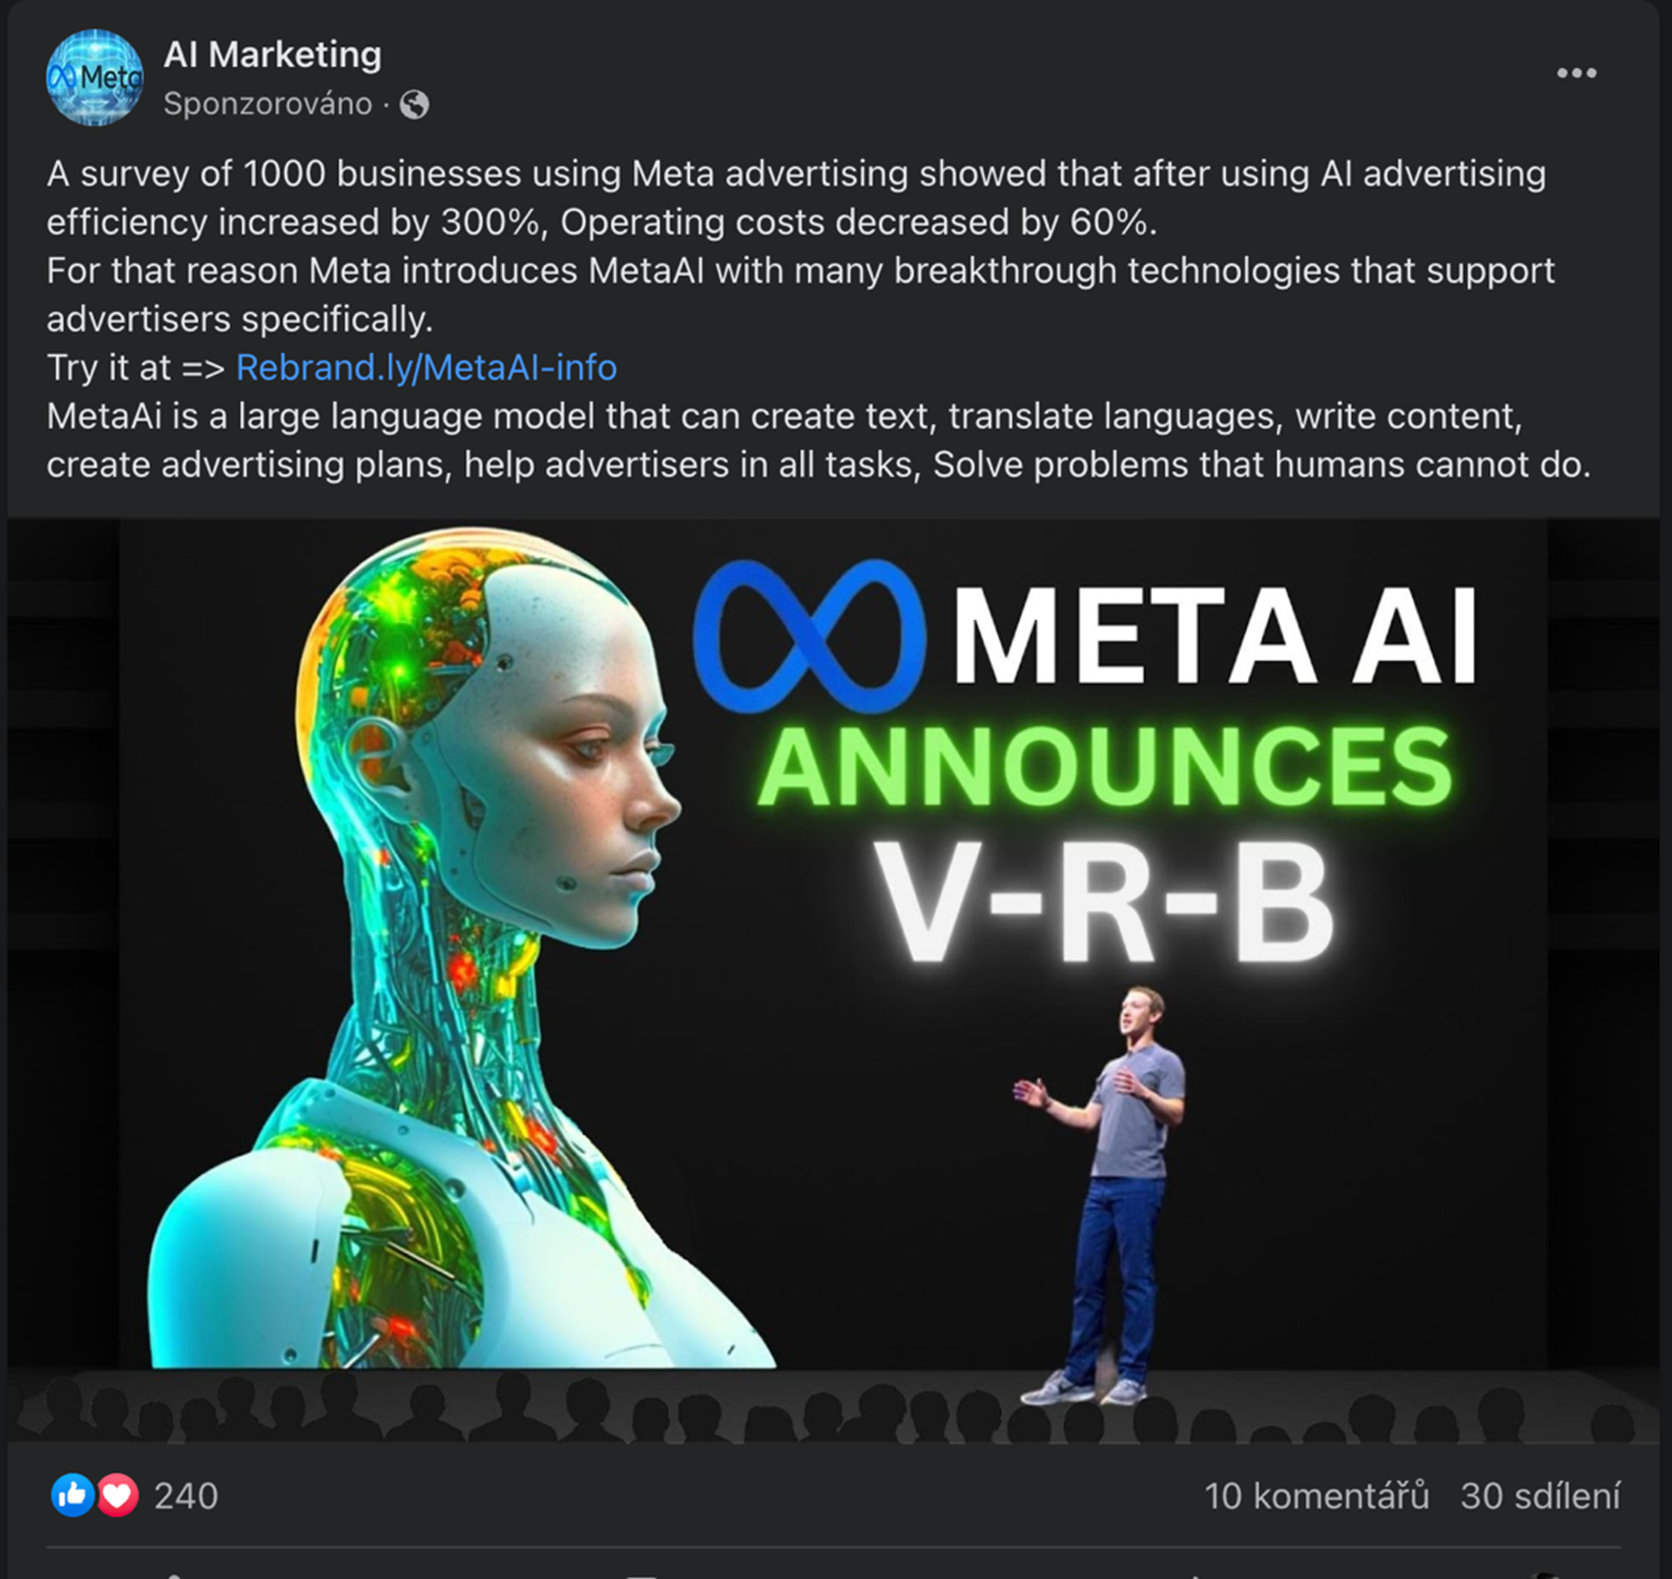 Figure 4. Advertisement from a fraudulent profile promising access to “Meta AI”